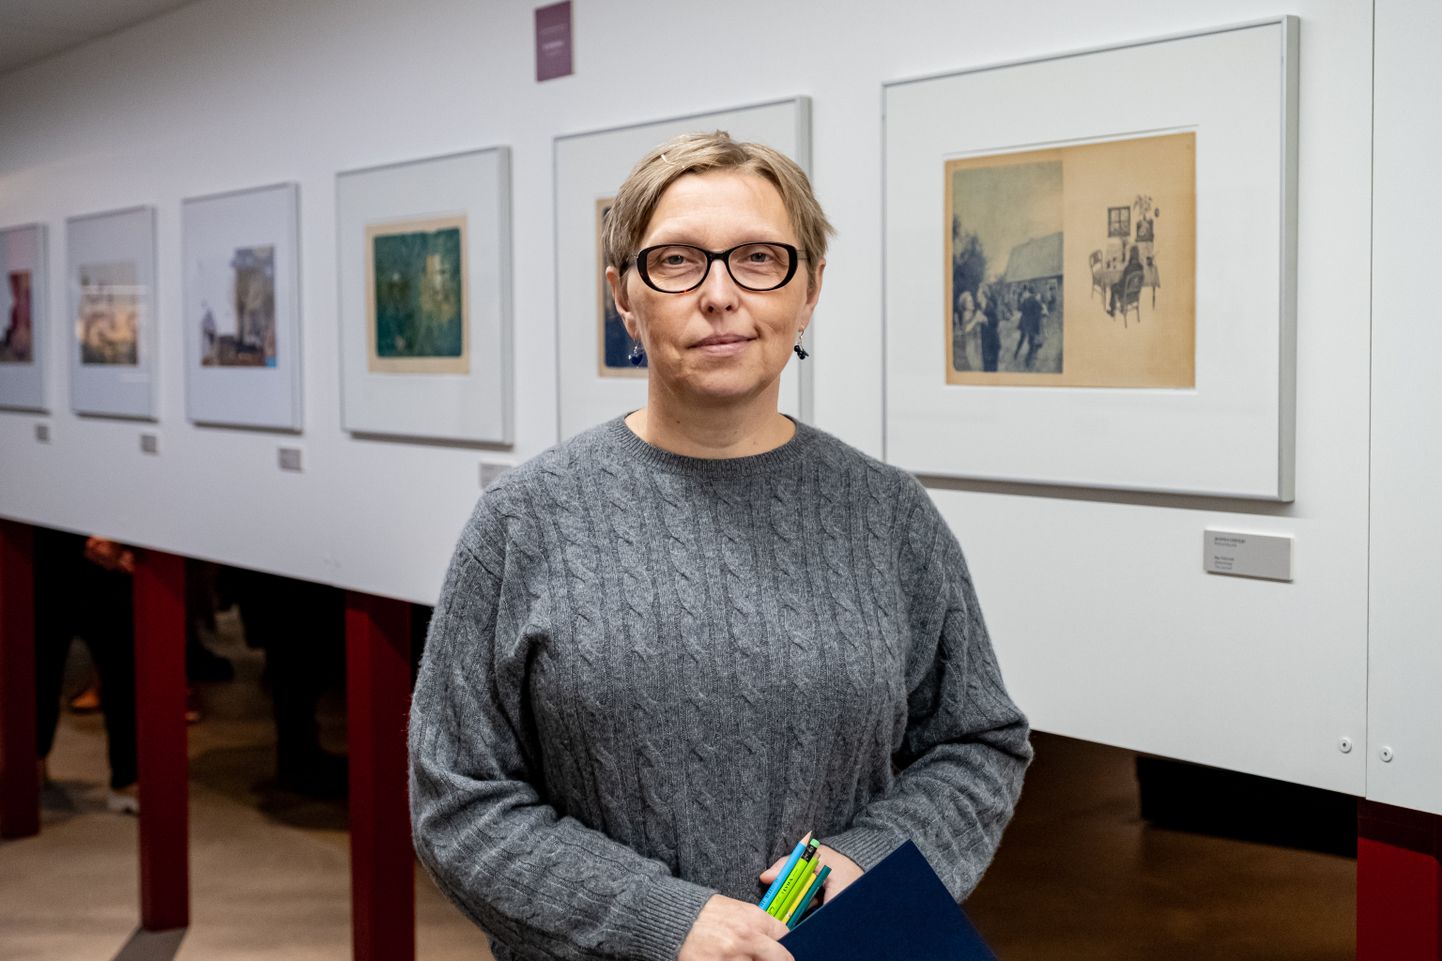 Joanna Concejo at the opening of the Tallinn illustration triennial «The power of the image», where she was awarded the main prize of the triennial.